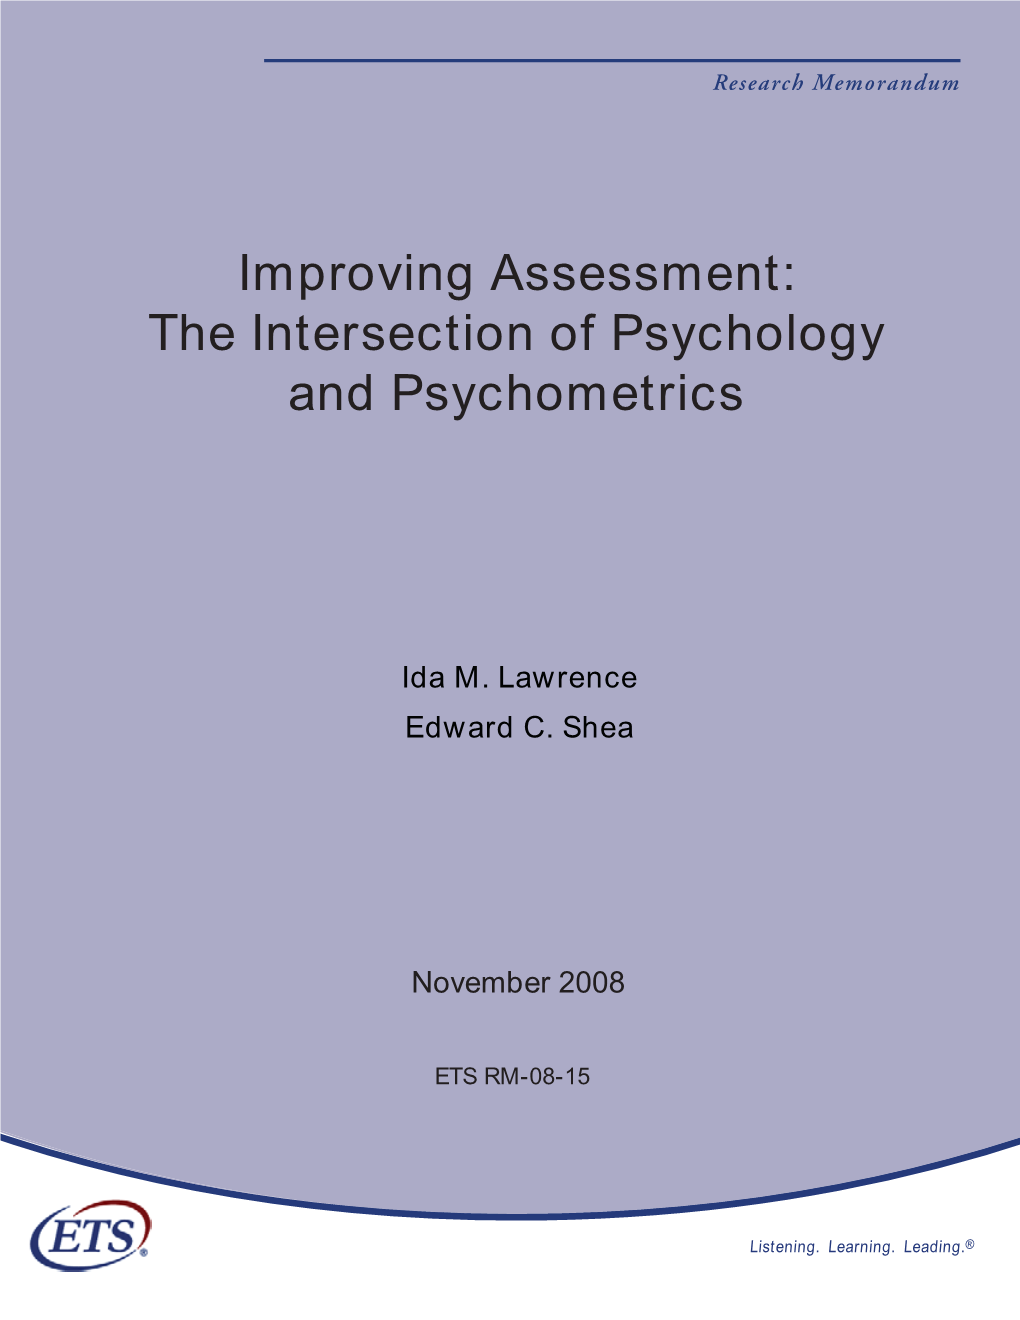 The Interaction of Psychology and Psychometrics